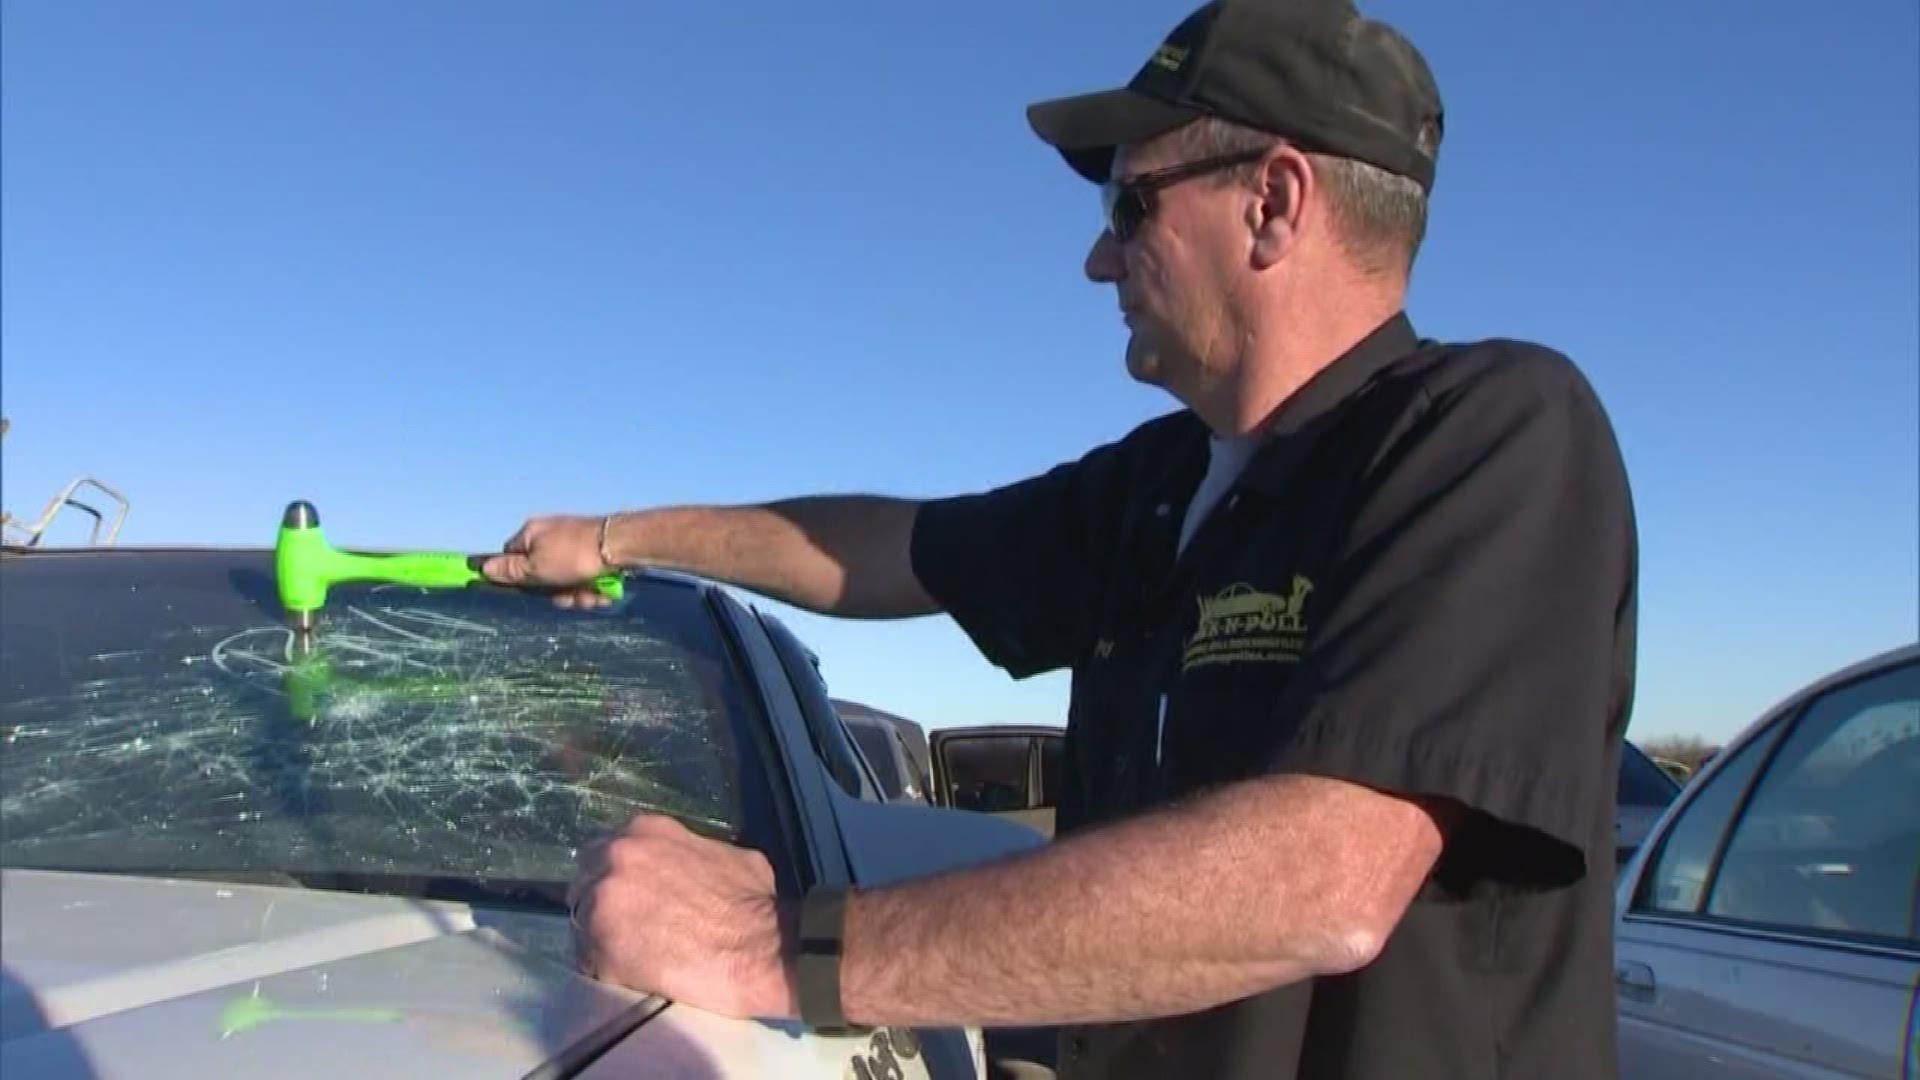 Many people have emergency hammers and similar tools just in case they need to break car windows in an emergency situation but the KHOU 11 Verify team decided to take a closer look and see which tools really work and which ones do not.